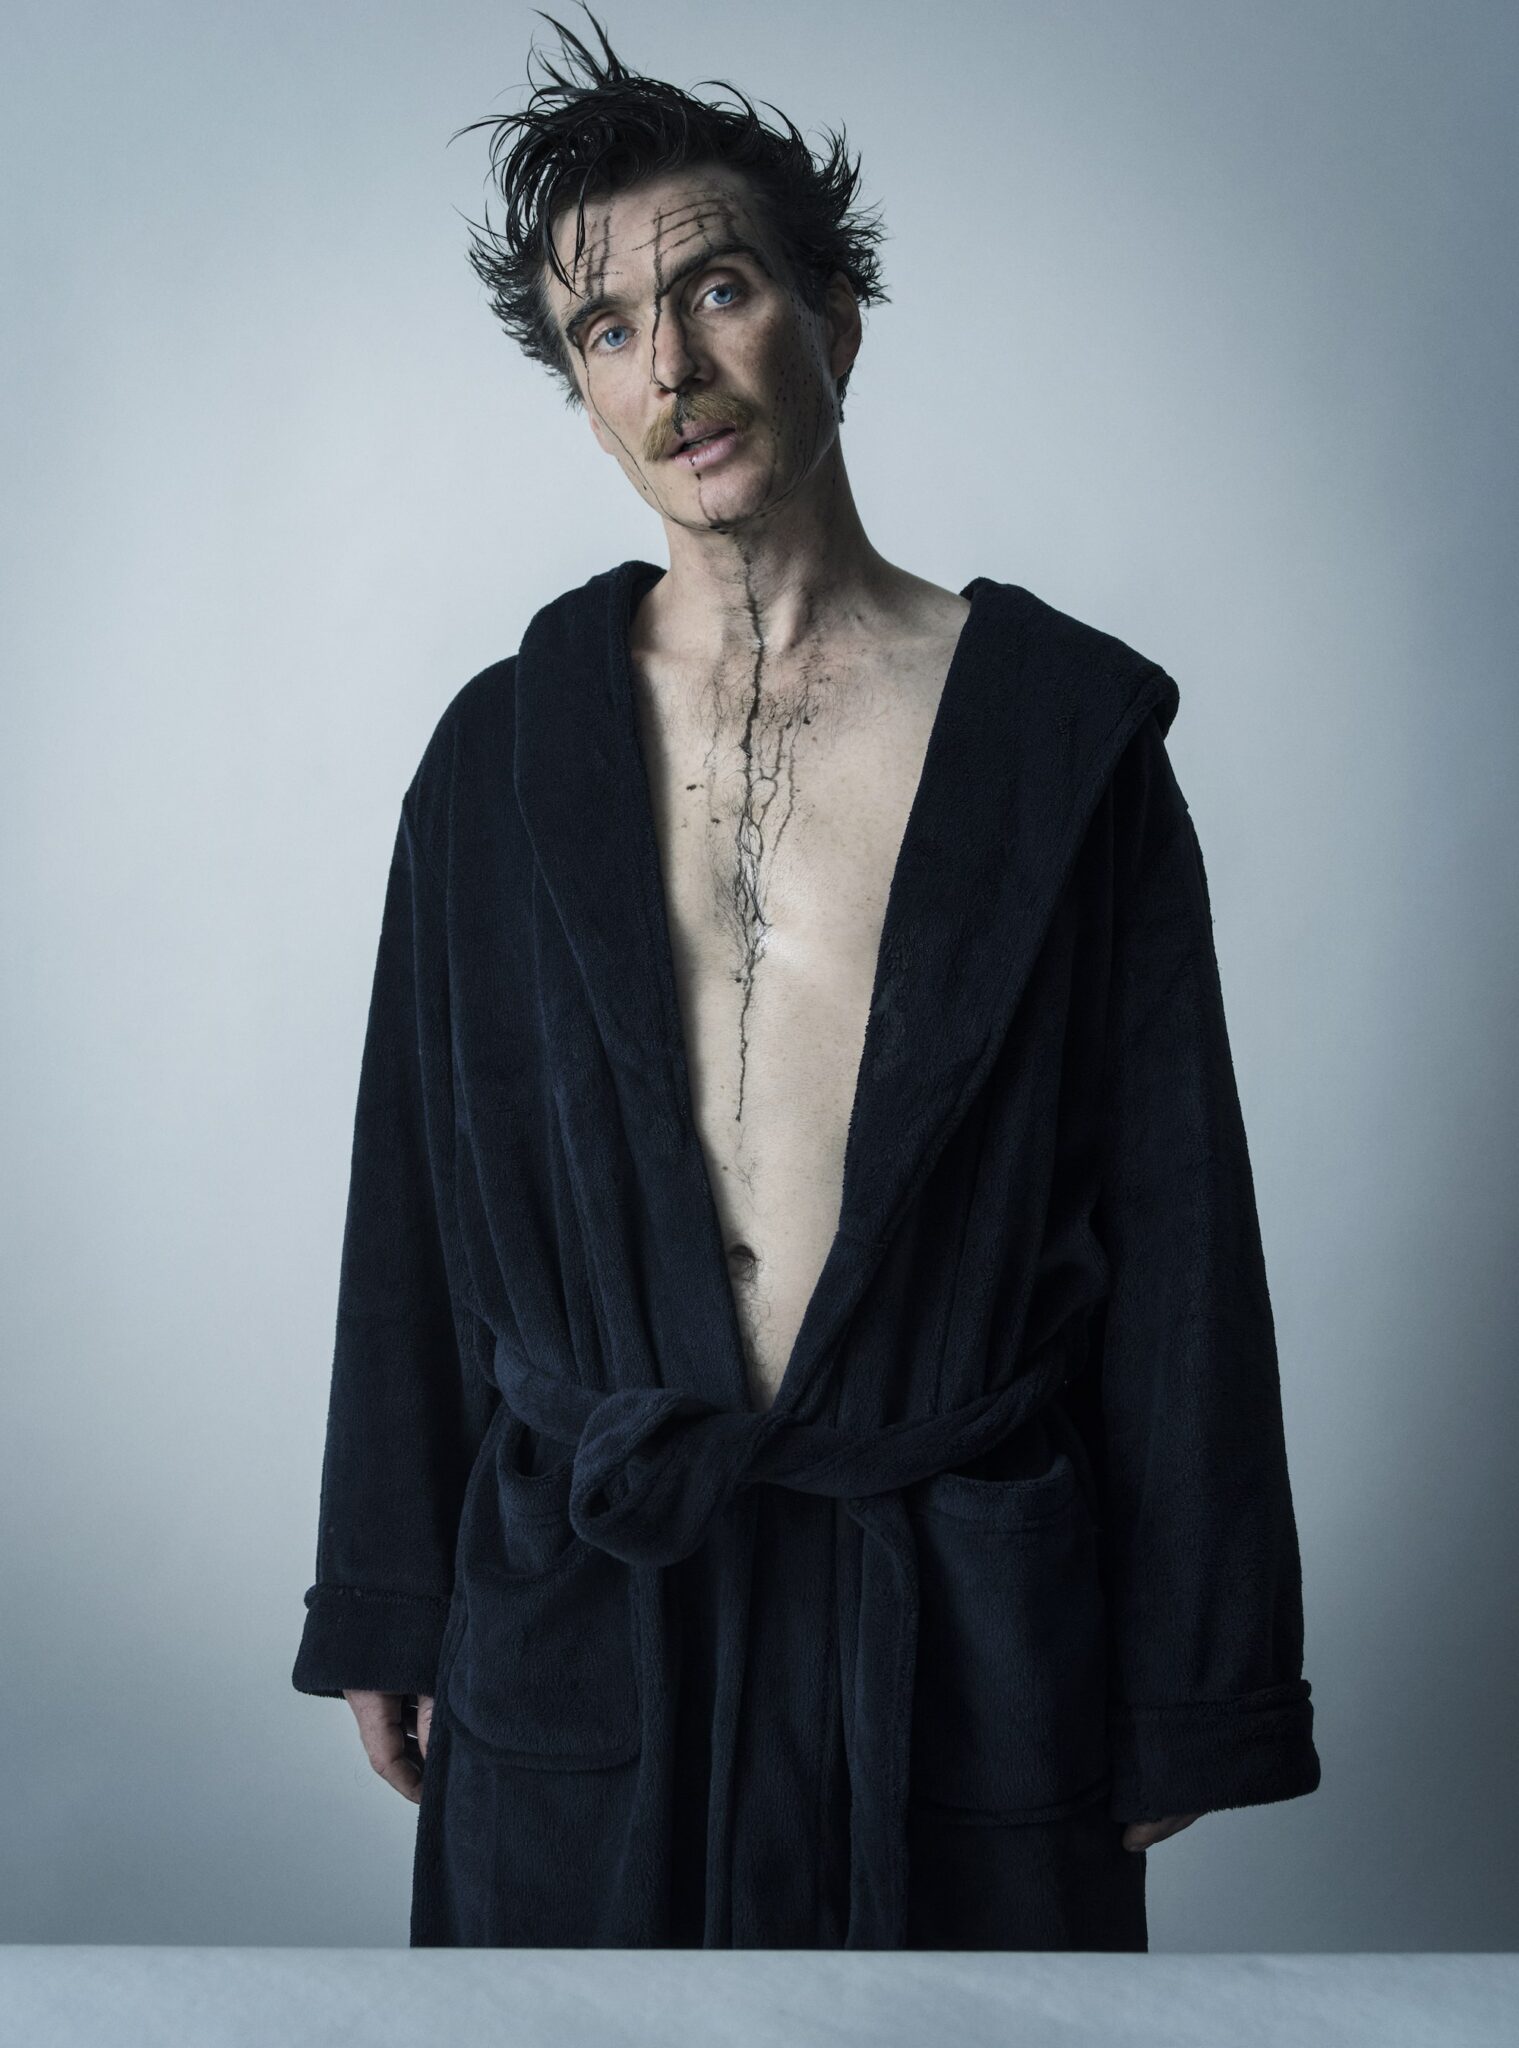 An actor wearing a dressing gown with the front open, showing their bare chest. They have ink over their face, running down their body, and dishevelled hair.